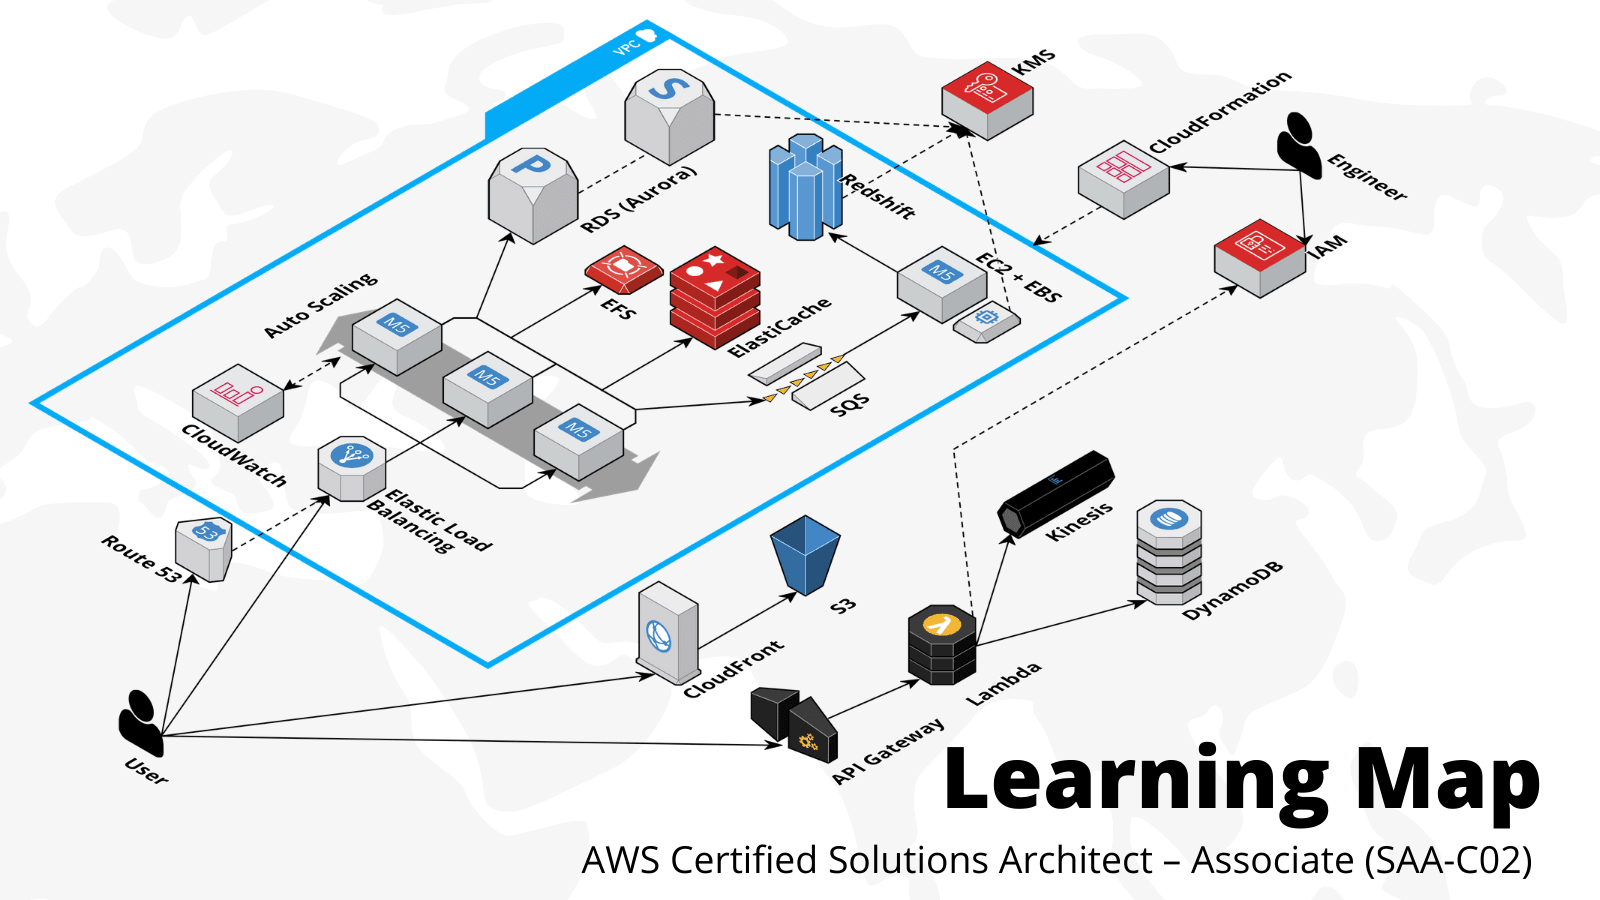 AWS Certified Learning Map